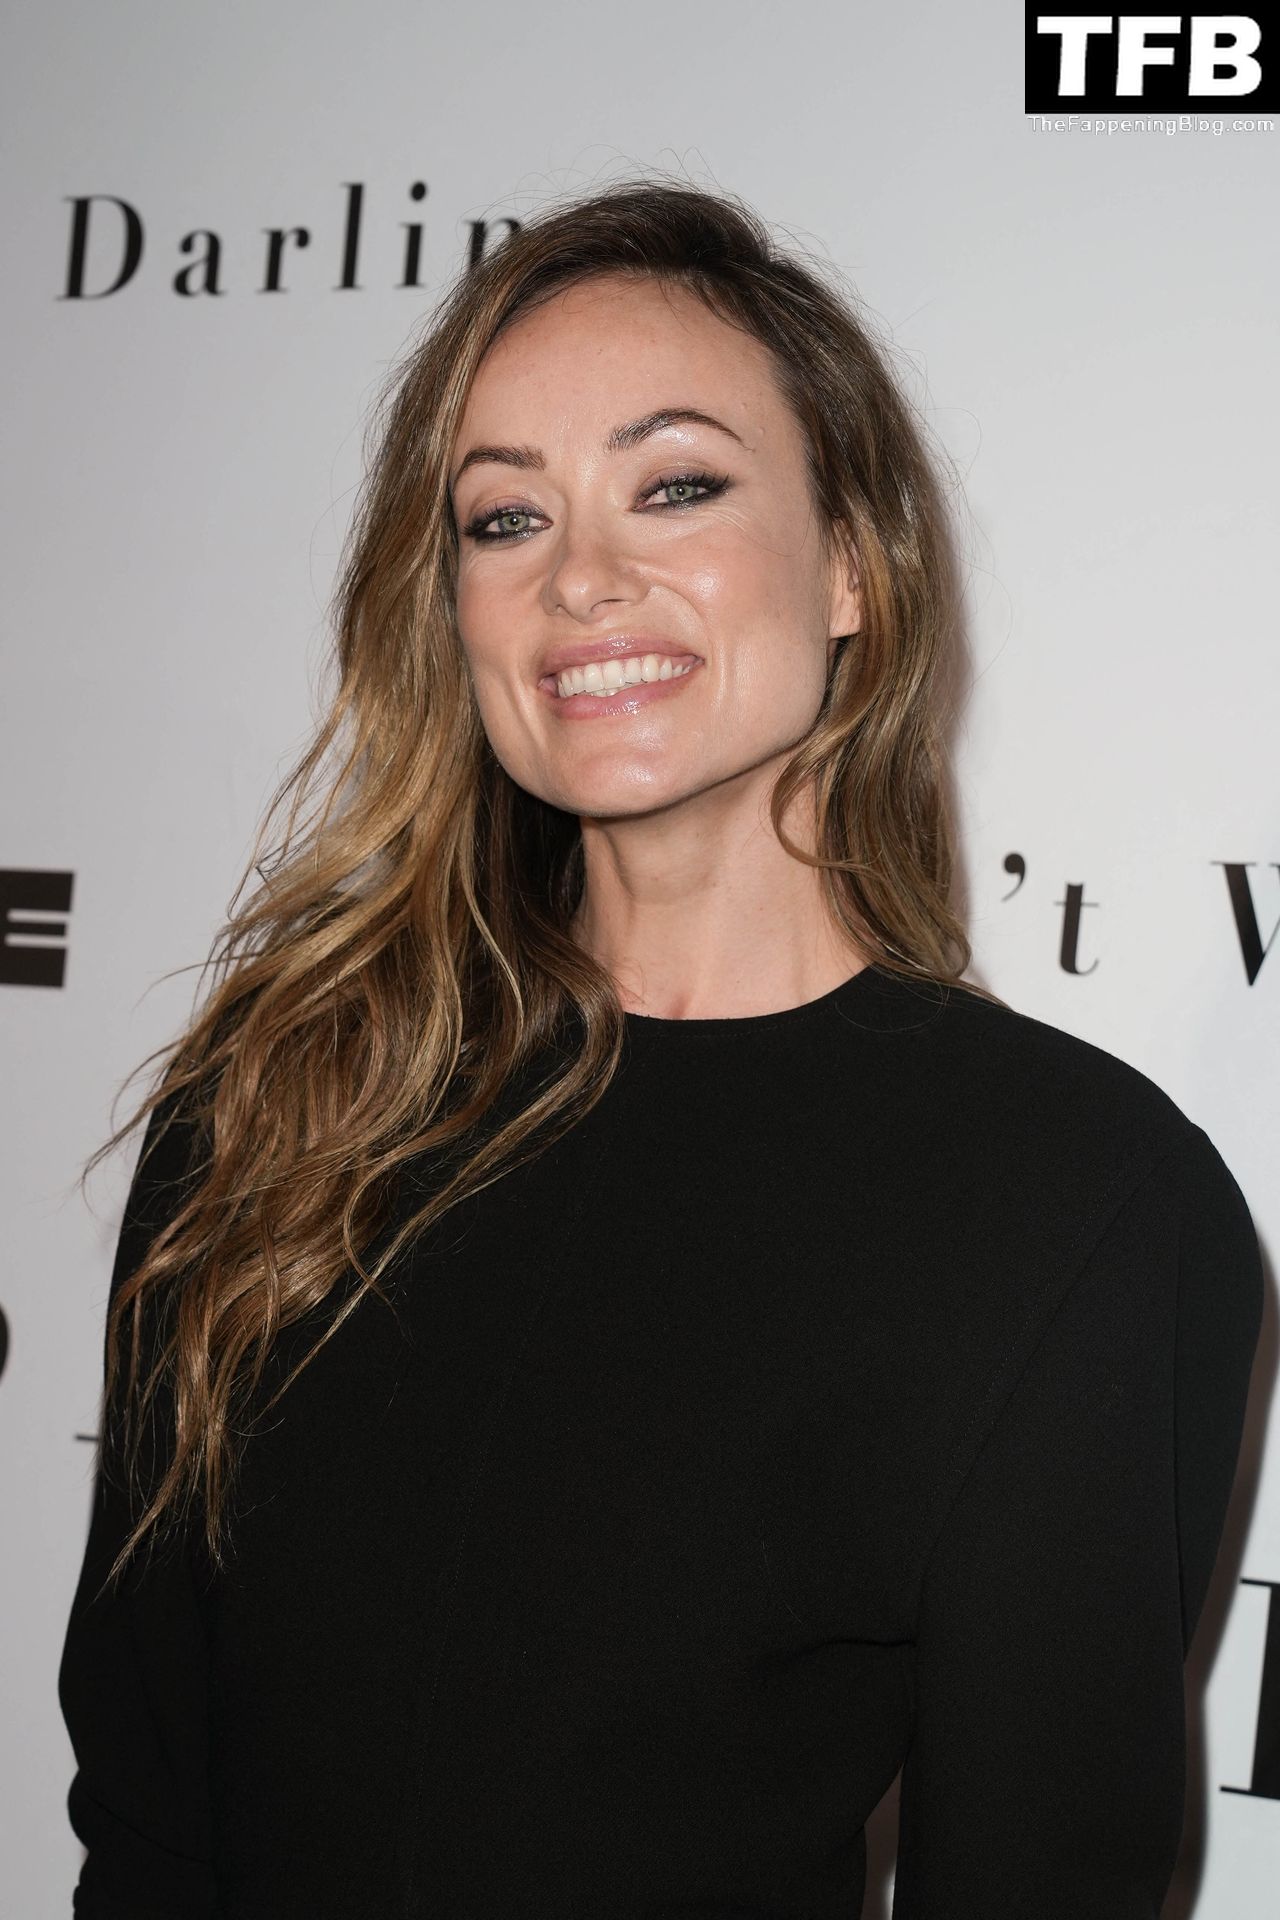 Olivia Wilde Wears a Sexy Black Dress as She Heads to the ‘Don’t Worry Darling’ Premiere in NYC (77 Photos)